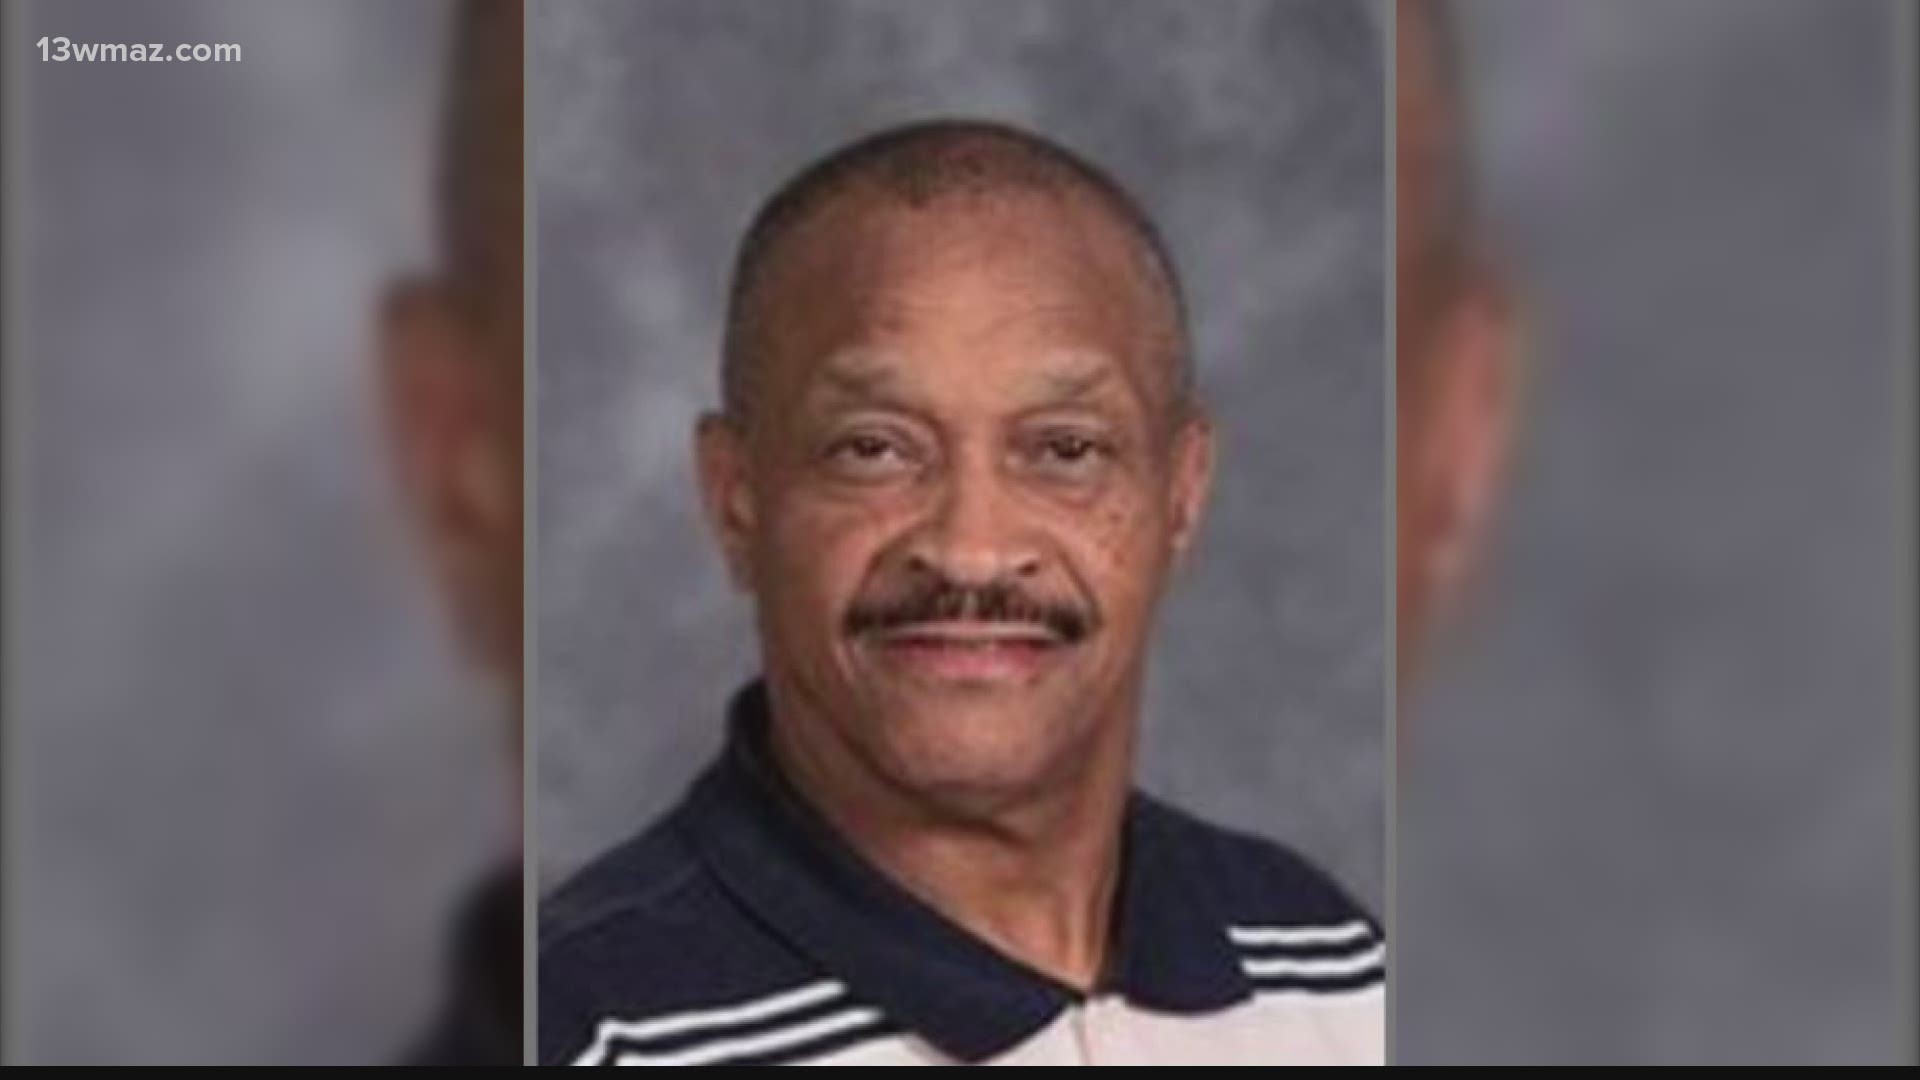 The district says Coach Carey taught social studies at the high school for more than two decades